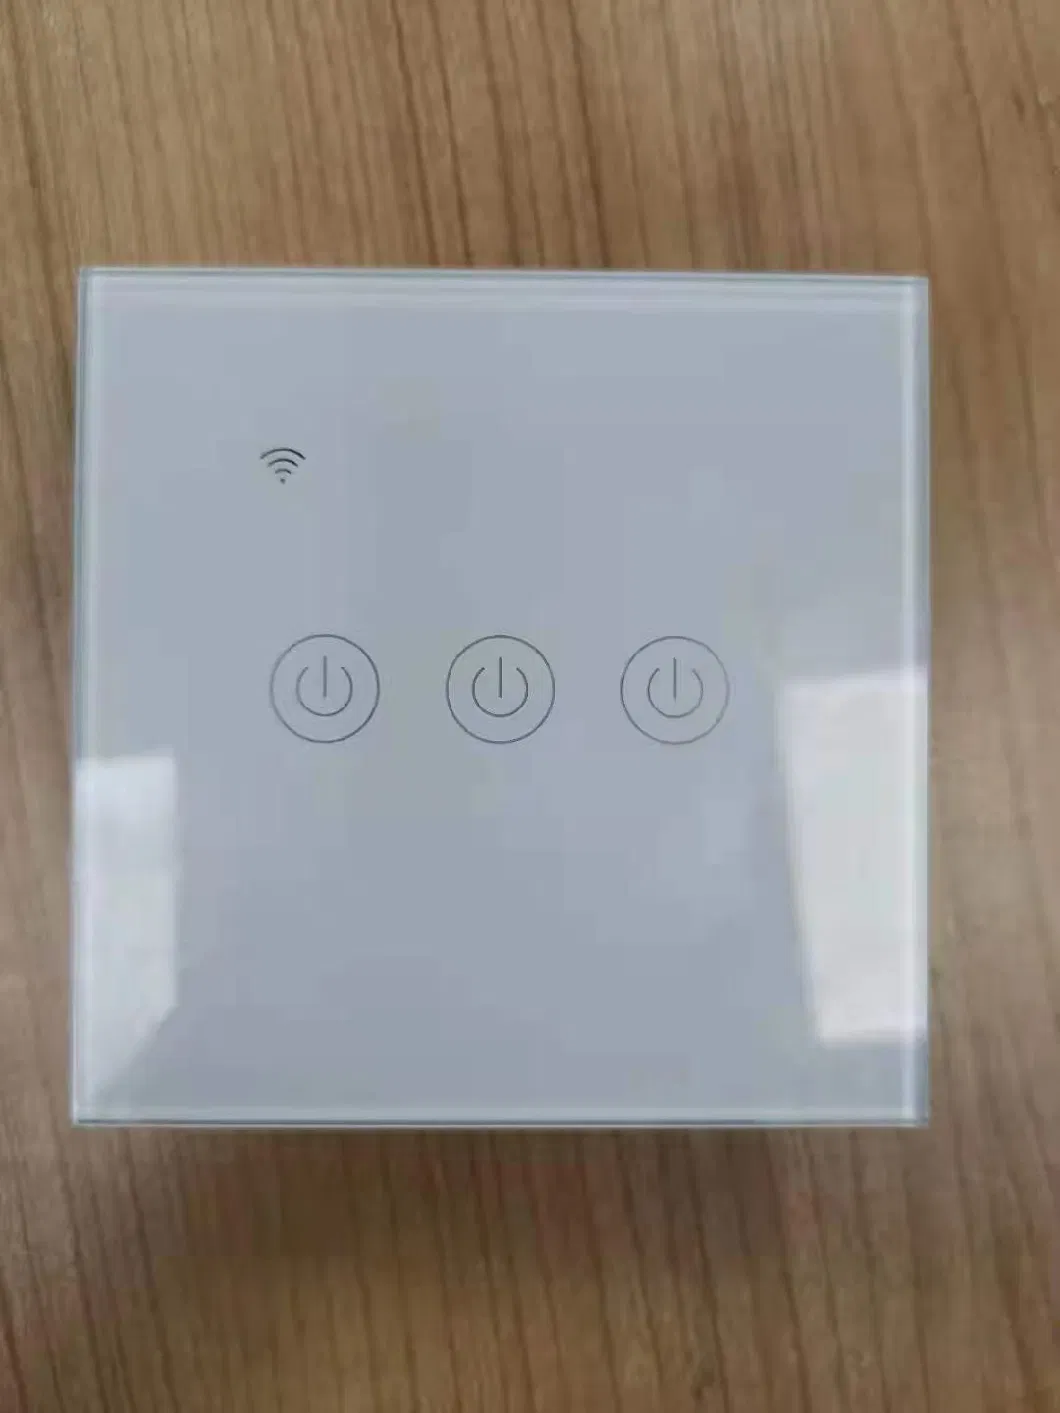 WiFi Touch Smart Wall Light Switch Tempered Glass Panel Work with Alexa/Google